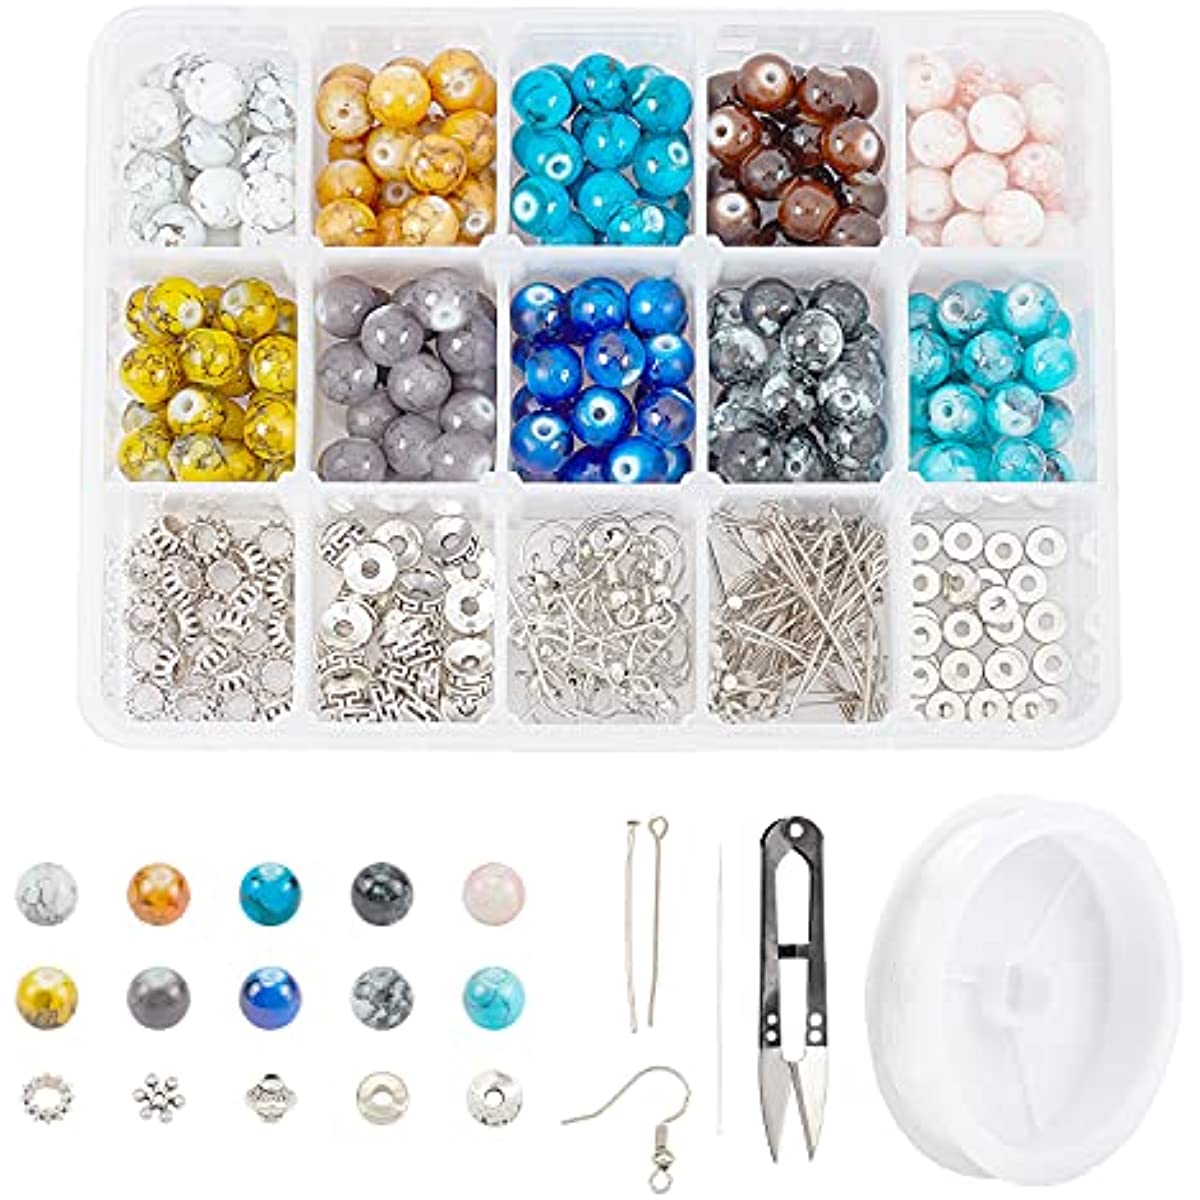 NOBRAND 1 Box 200pcs 10 Colors 8mm Glass Beads Jewellery Making Kit 150pcs Alloy Loose Spacer Bead with Beading Needle Earring Hooks Elastic Thread & Steel